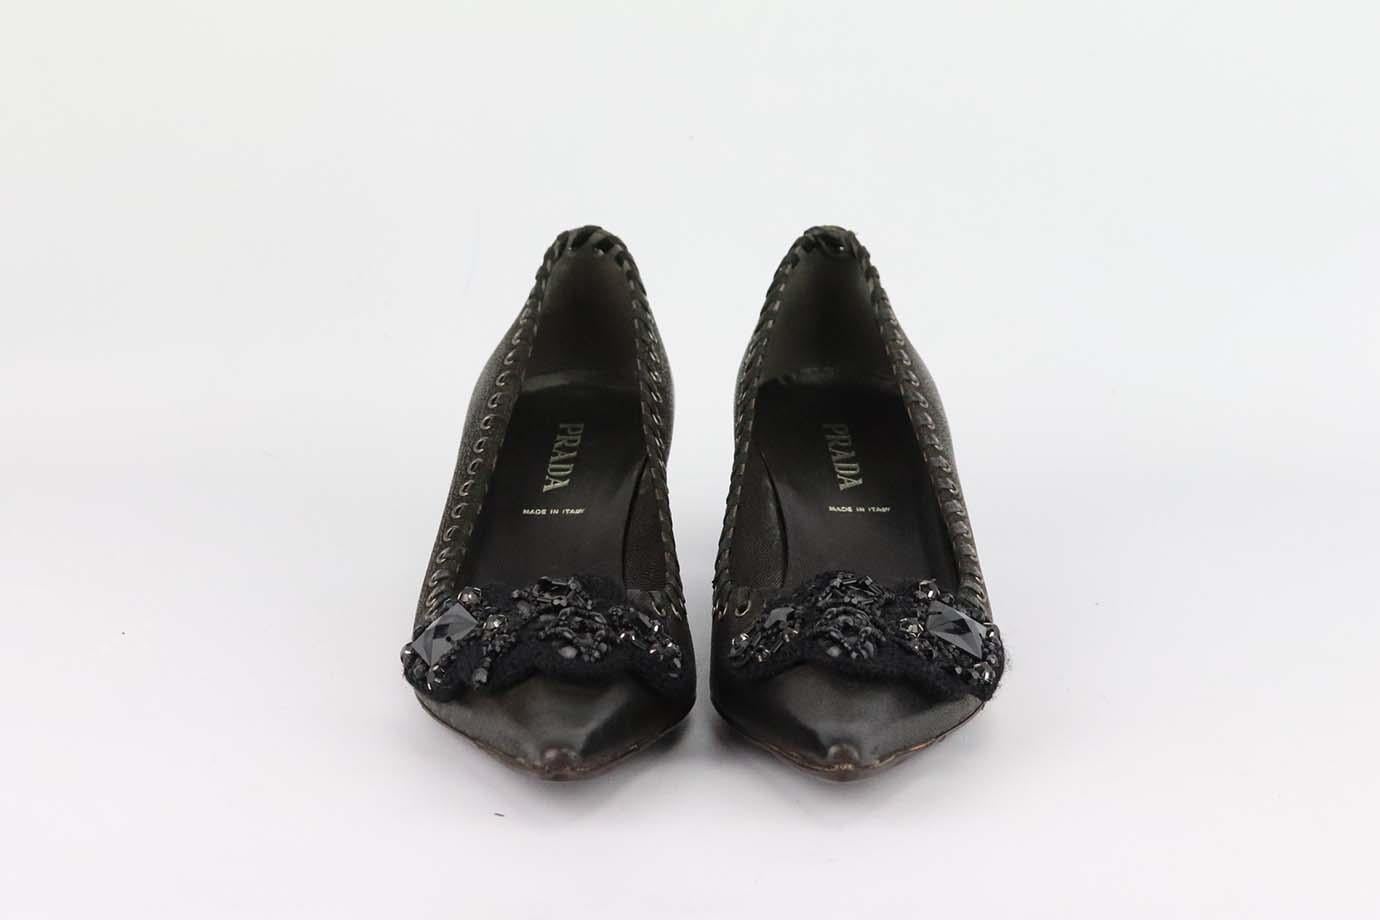 These vintage pumps by Prada are dotted with crystals along the sweetheart vamp, this point-toe pair has been made in Italy from textured black leather, they're set on comfortable 38mm heels. Heel measures approximately 38 mm/ 1.5 inches. Black